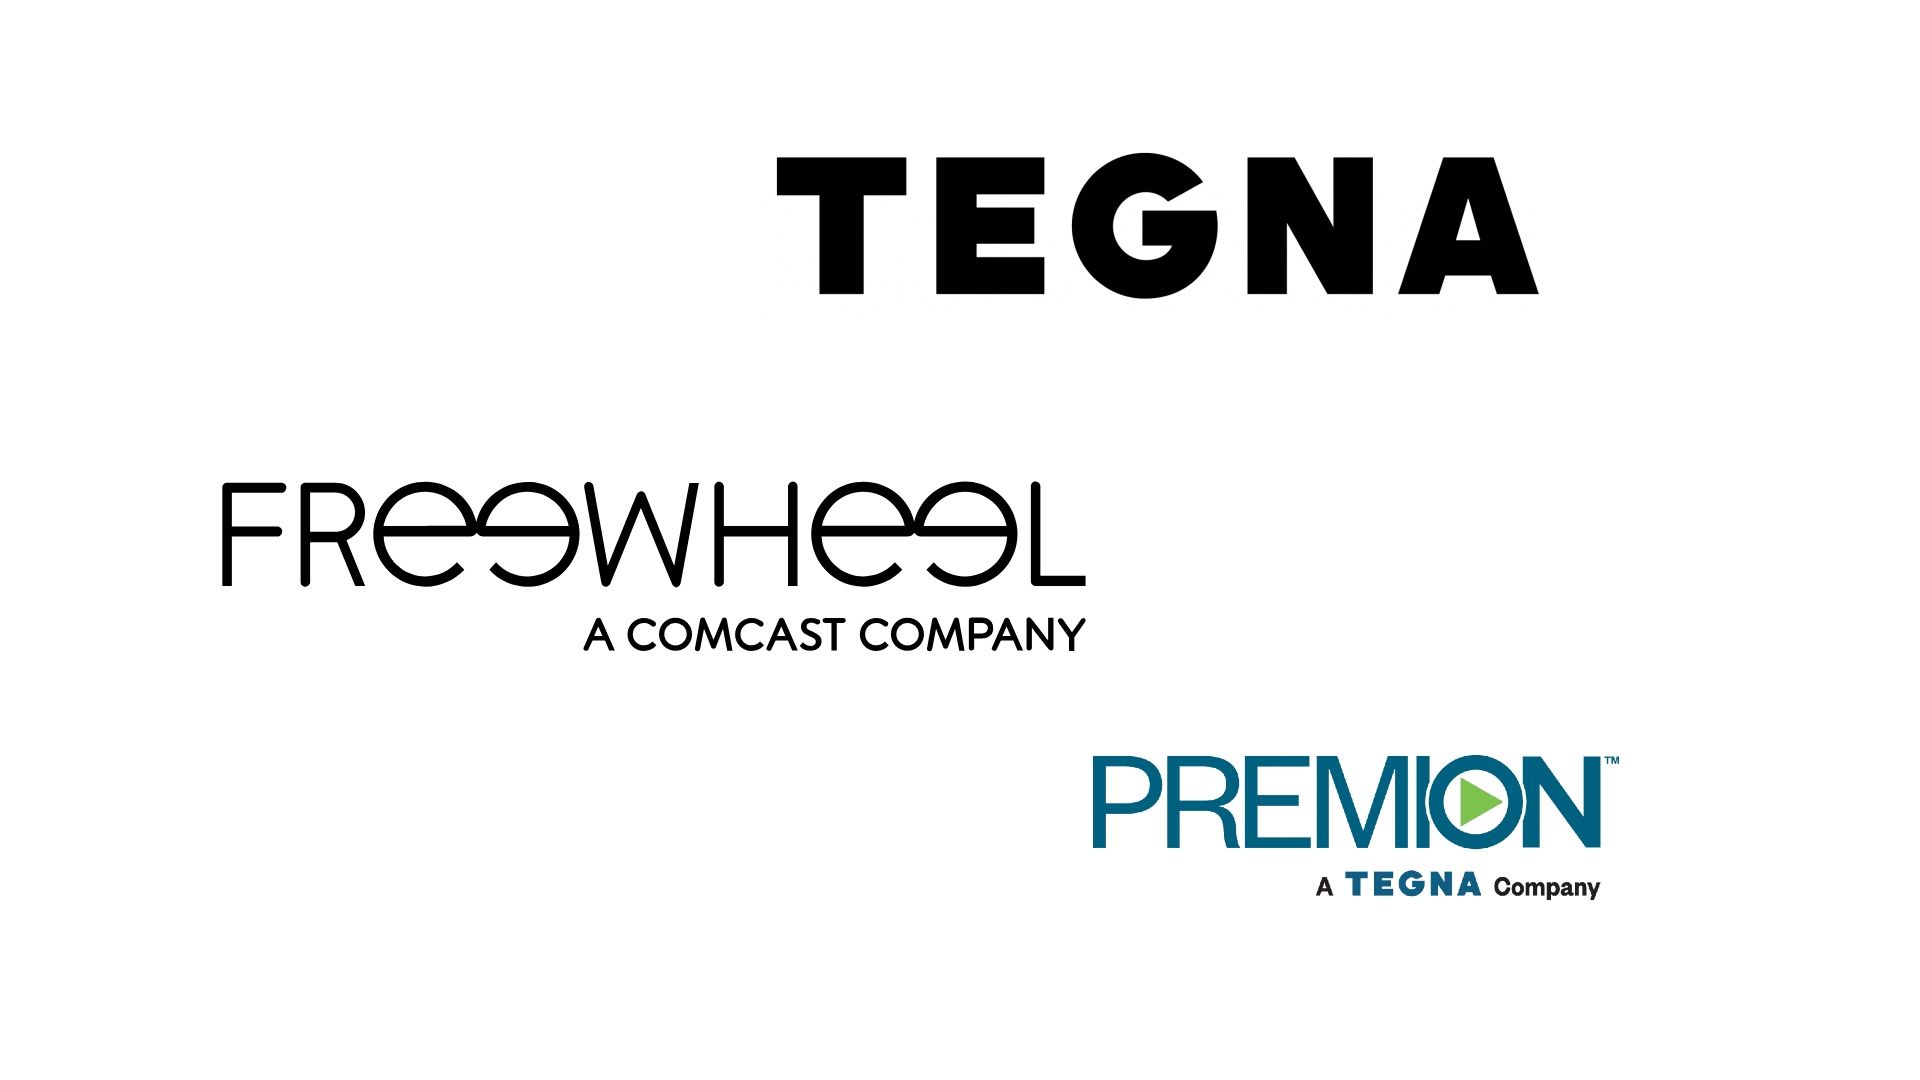 TEGNA signs with FreeWheel a new multi-year deal